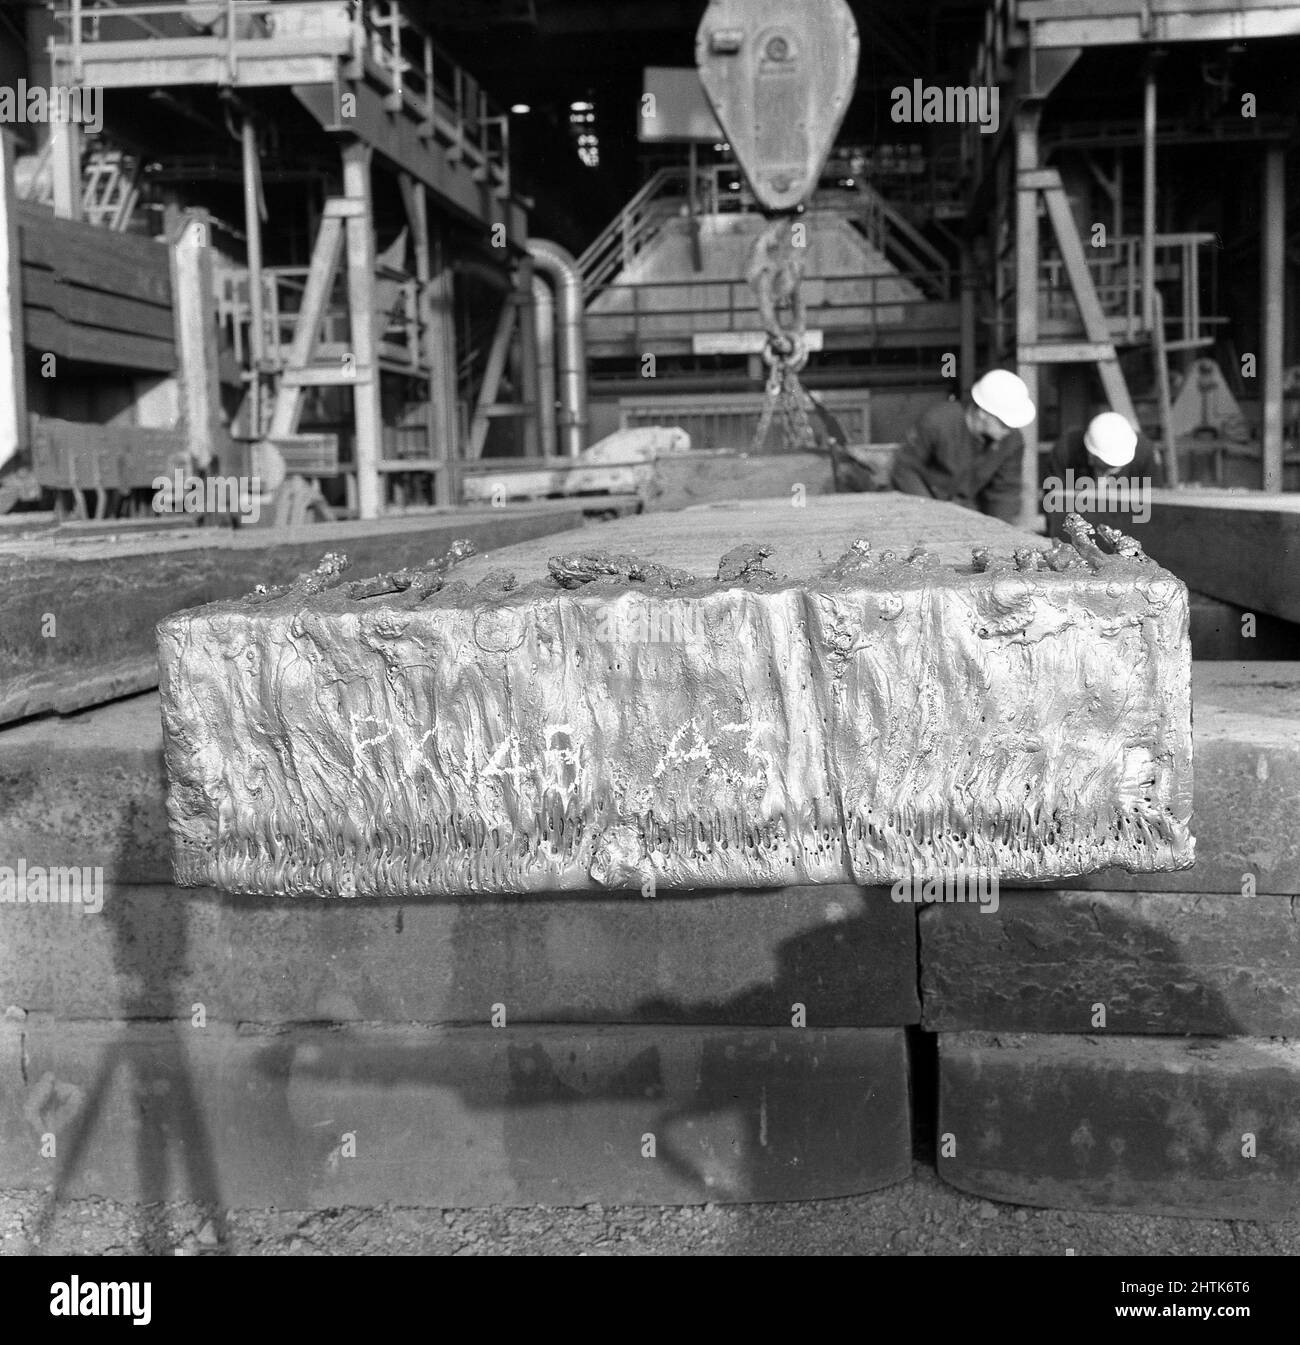 1950s, historical, a rectangular slab of steel, with markings, inside a slabing mill at the Abbey Steel Works, Port Talbot, Glamorgan, Wales, UK. Traditionally made by a blast furnace, slabs are semi-finished metal blocks used for making 'flat' steel products such as sheets, plates and other flat-rolled steel. Stock Photo